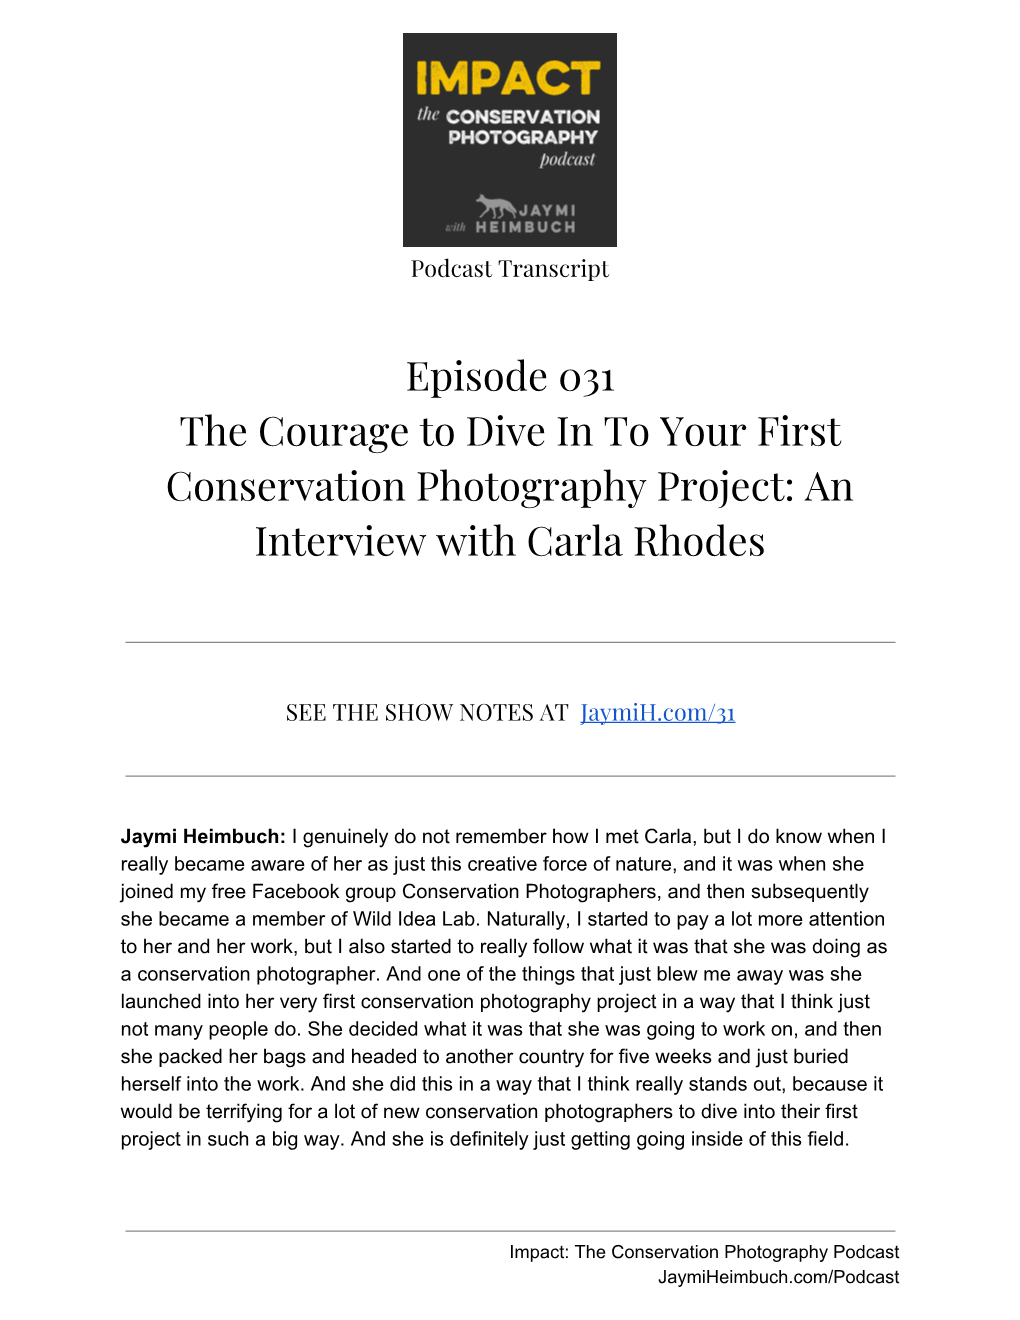 Episode 031 the Courage to Dive in to Your First Conservation Photography Project: an Interview with Carla Rhodes